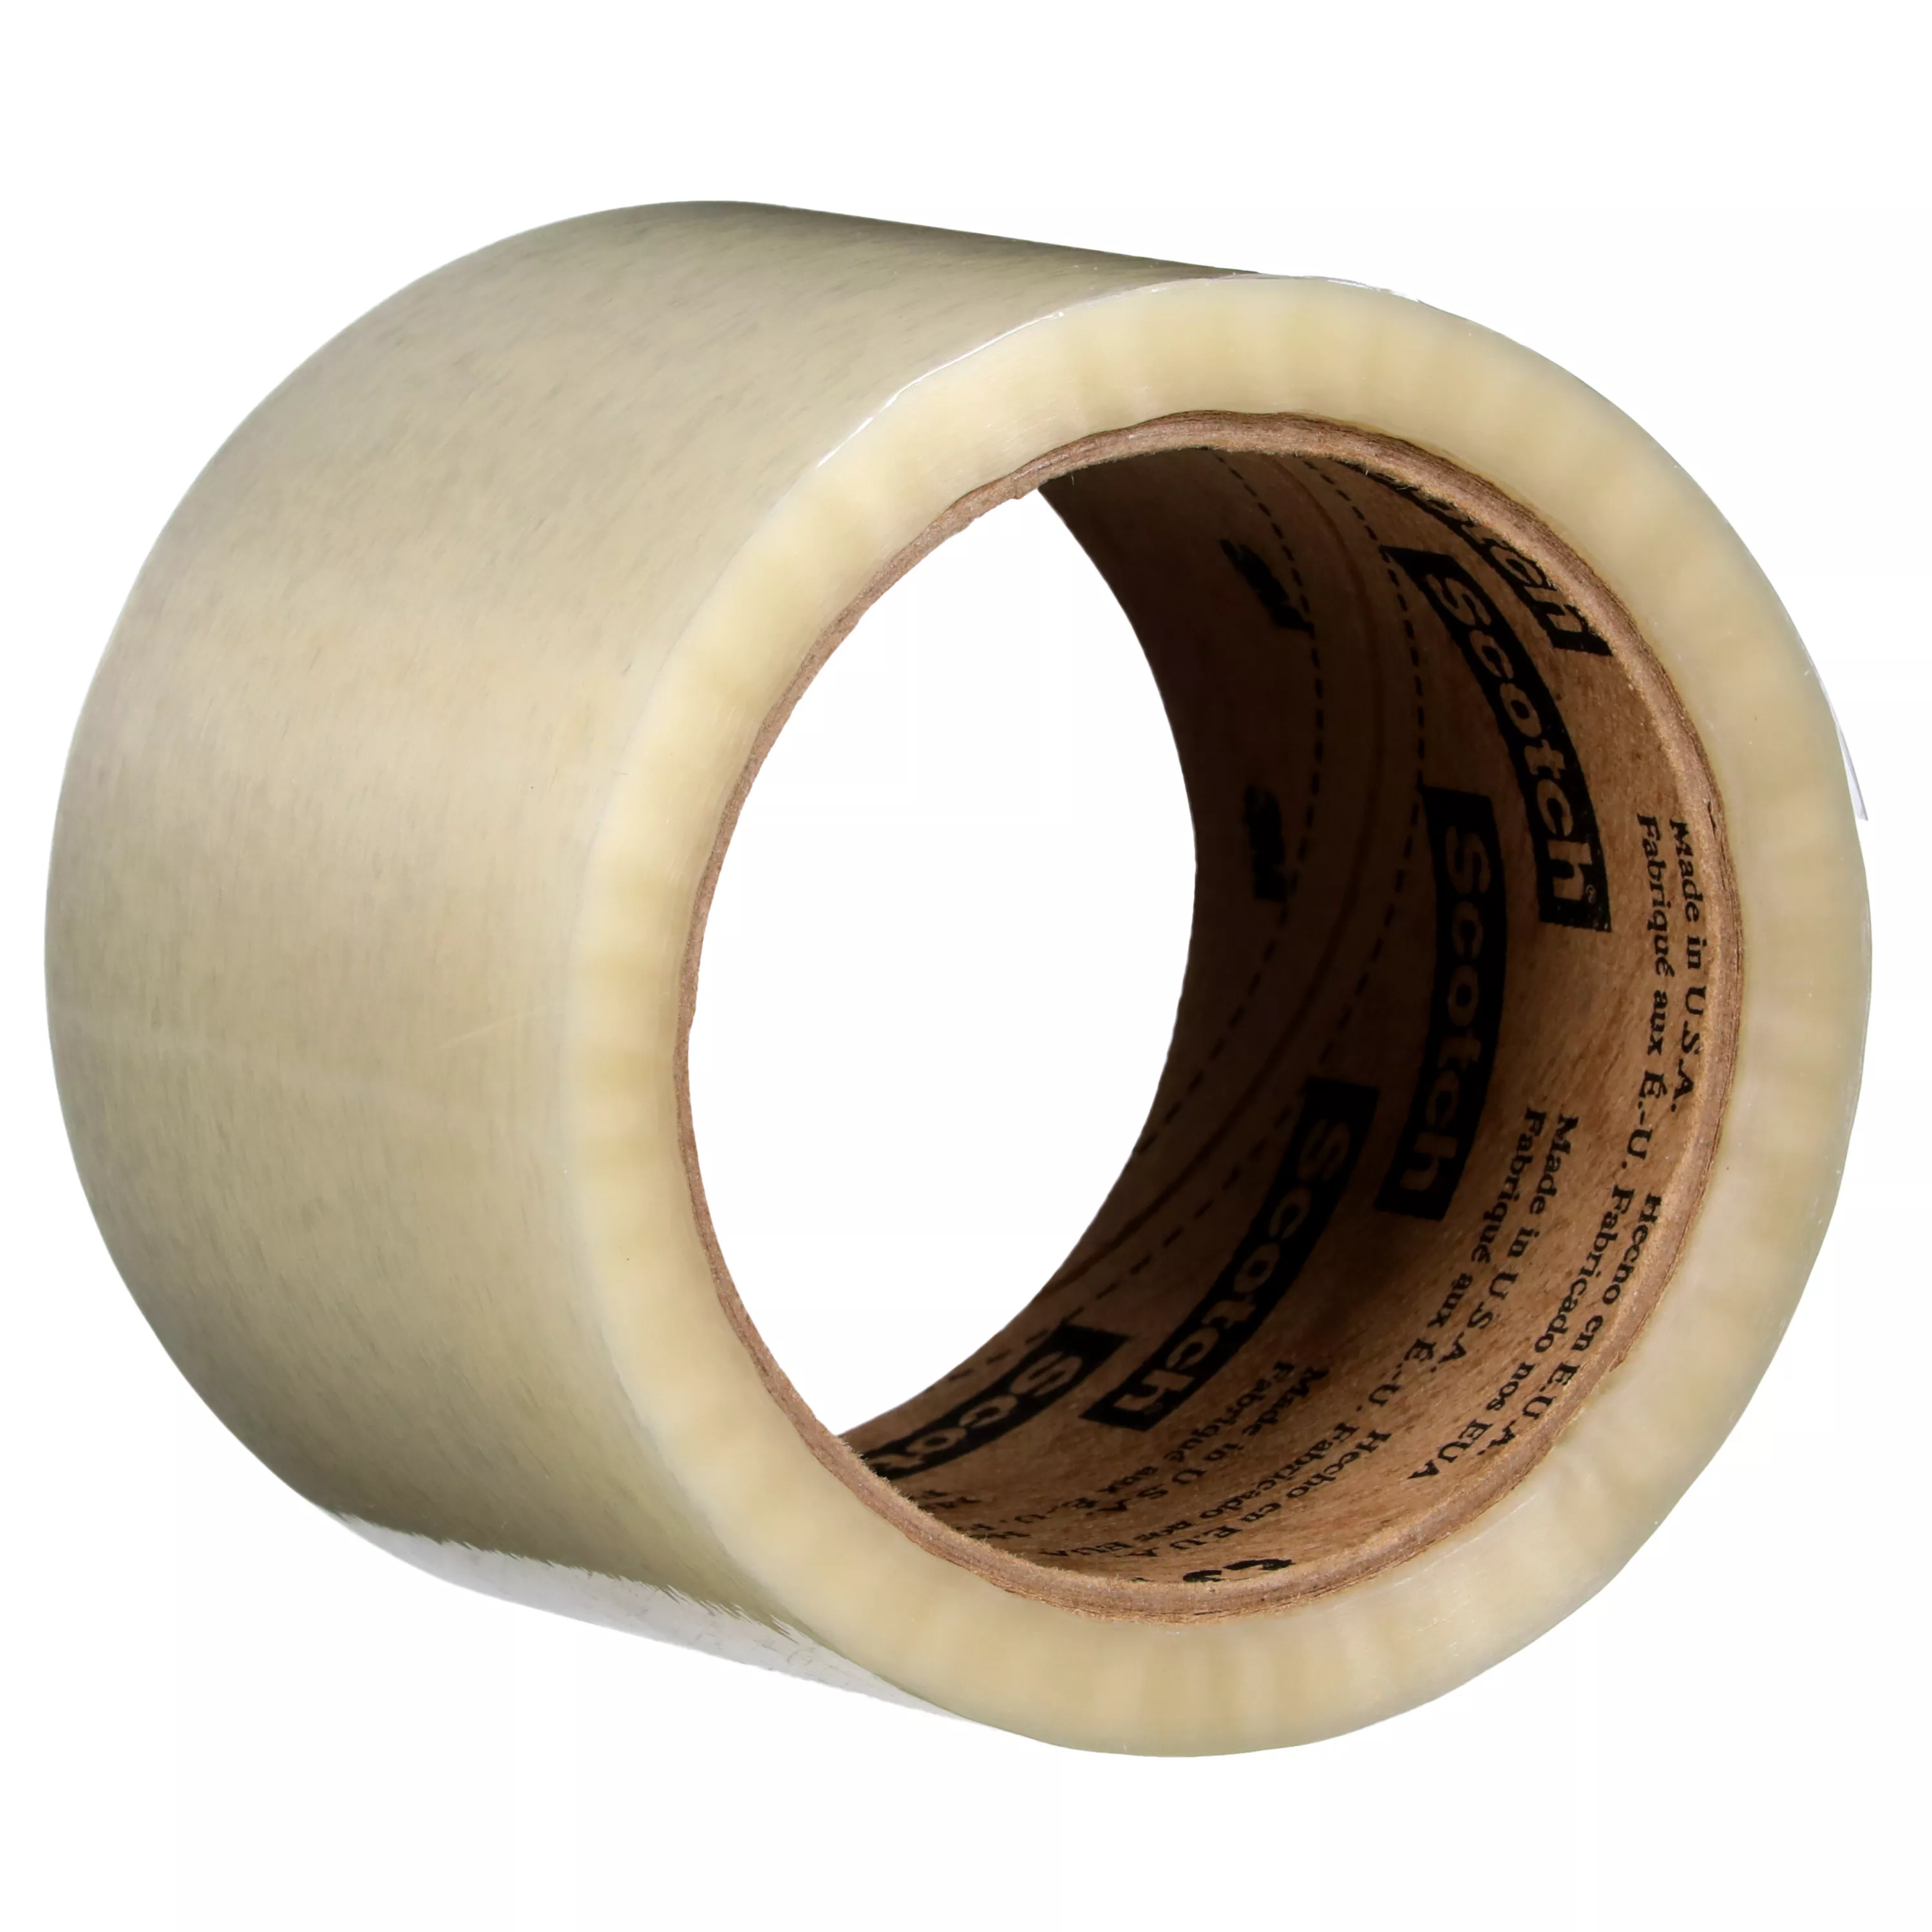 Scotch® Box Sealing Tape 371, Clear, 72 mm x 50 m, 24 per case (6
rolls/pack 4 packs/case), Conveniently Packaged